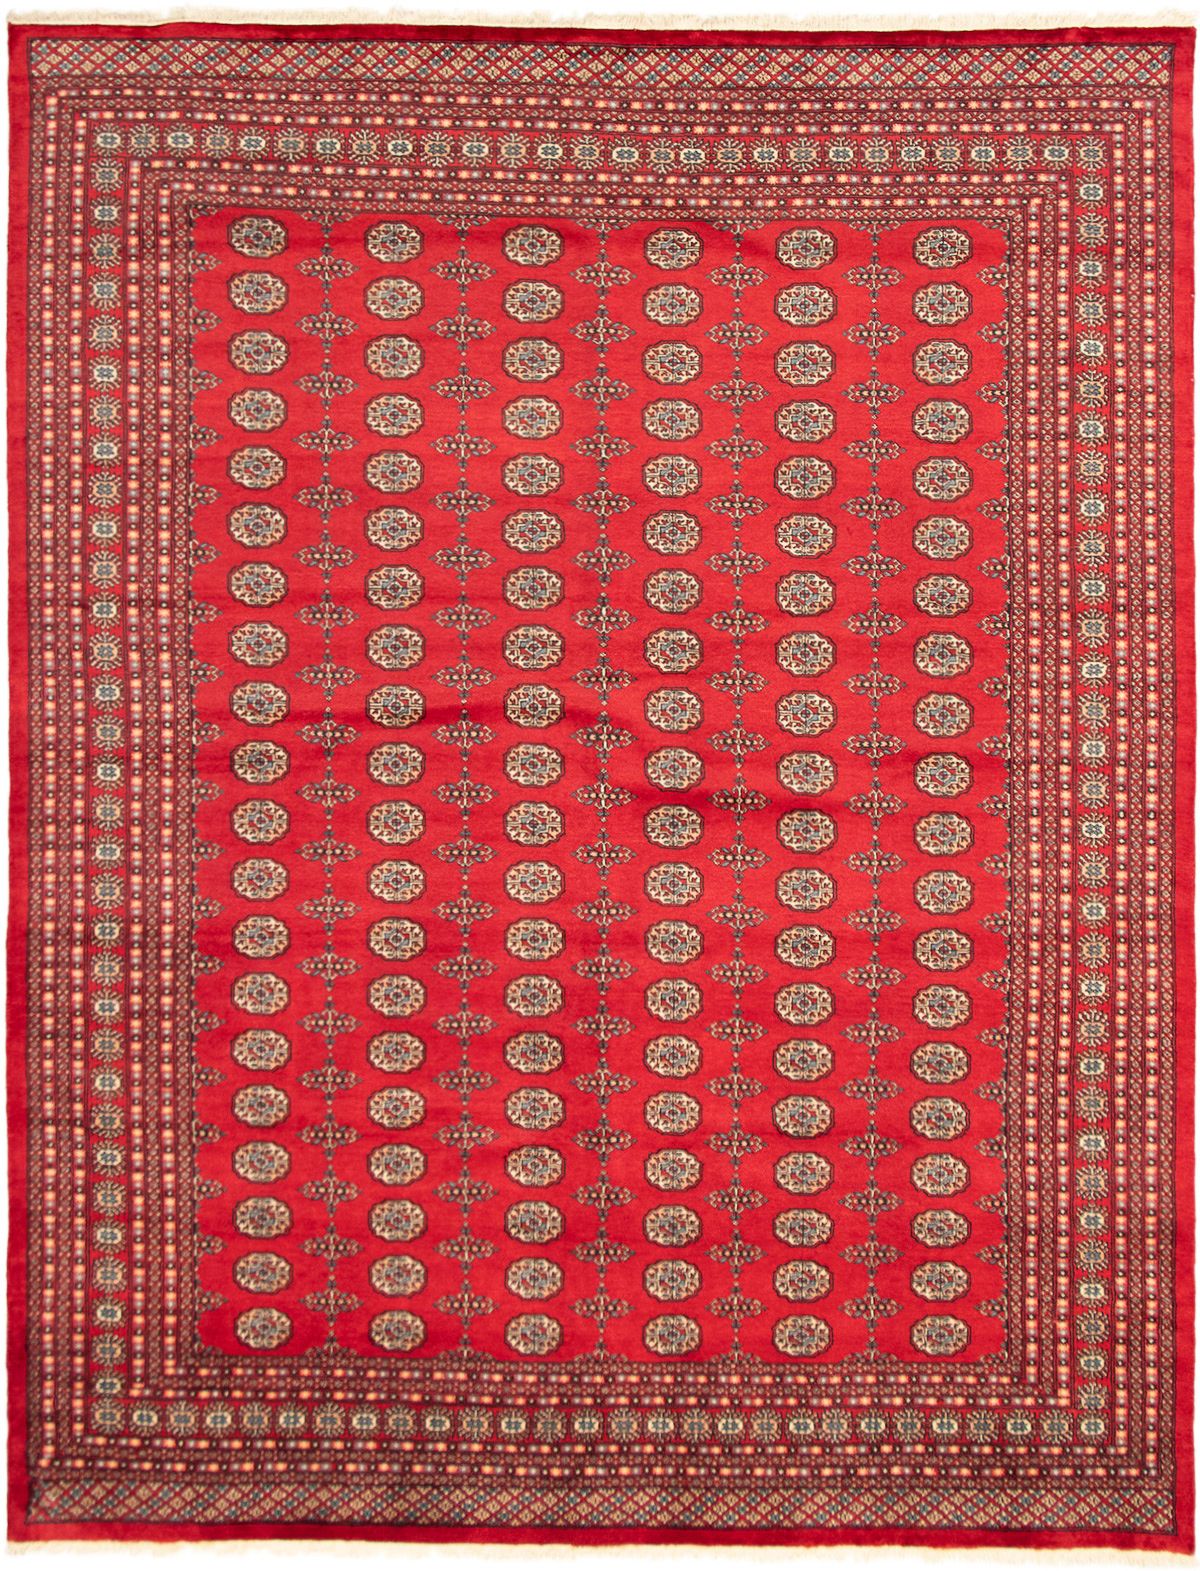 Hand-knotted Finest Peshawar Bokhara Red Wool Rug 9'2" x 11'10"  Size: 9'2" x 11'10"  